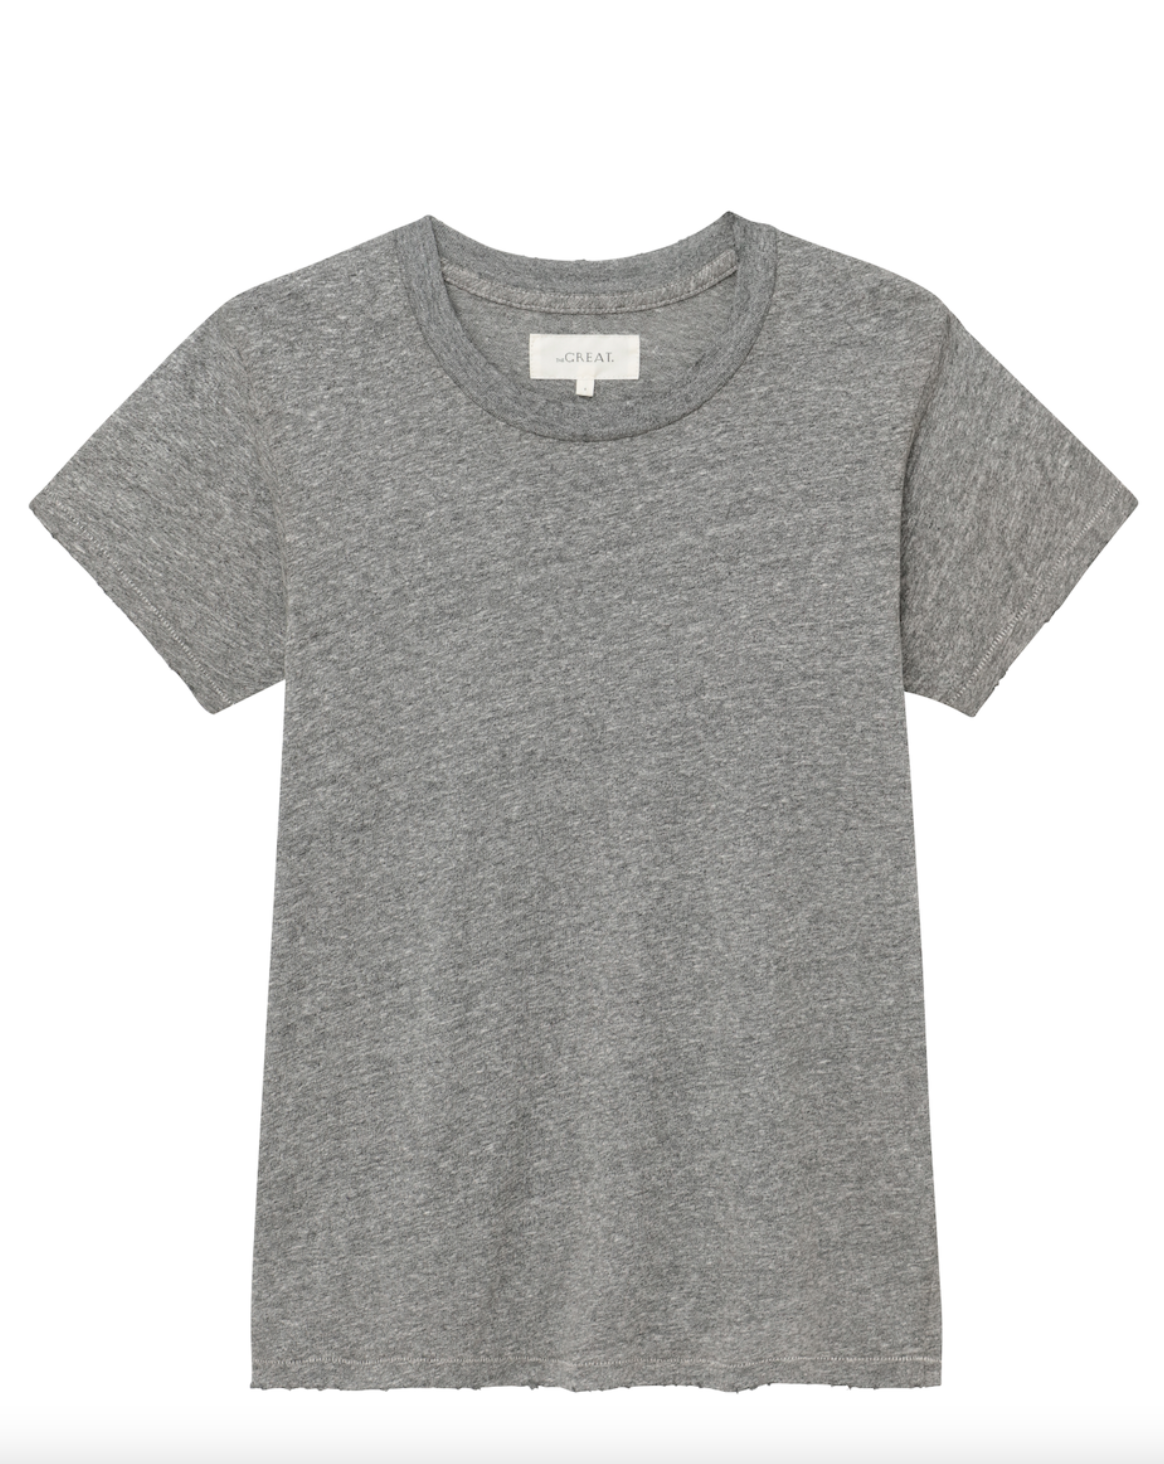 A plain VARSITY GREY crew-neck T-shirt with short sleeves, displayed on a white background. The Slim Tee by The Great Inc. has a simple and casual design, perfect for relaxing weekends at your Scottsdale Arizona bungalow or for everyday wear.